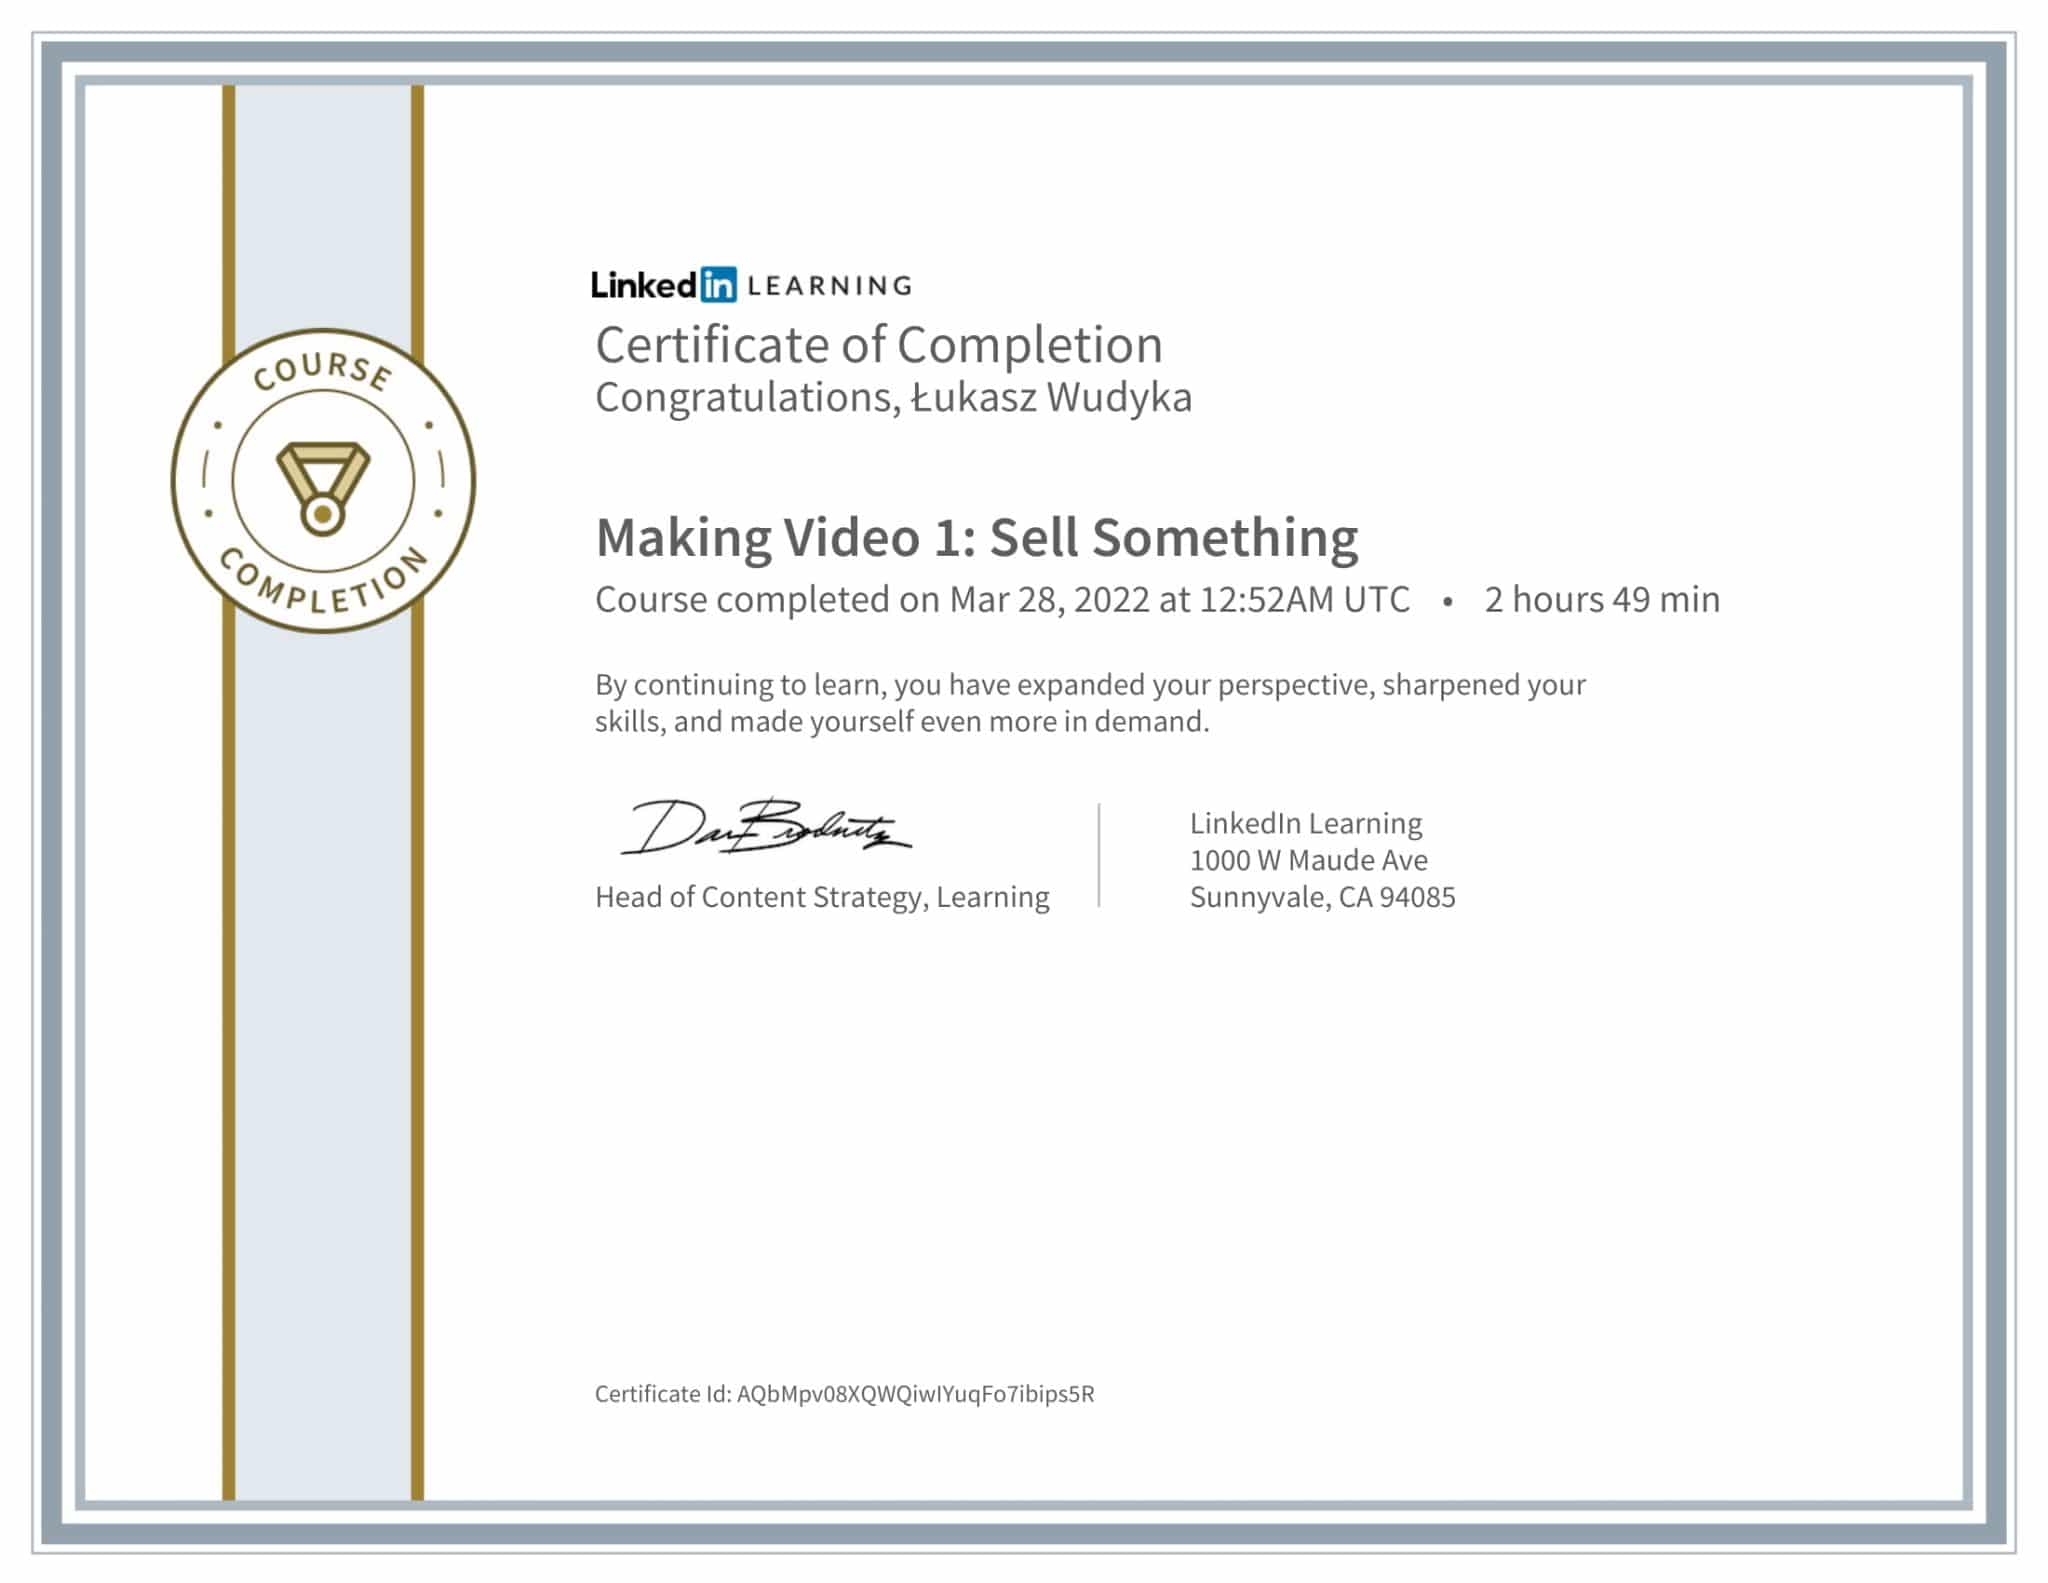 CertificateOfCompletion_Persuading Others-1